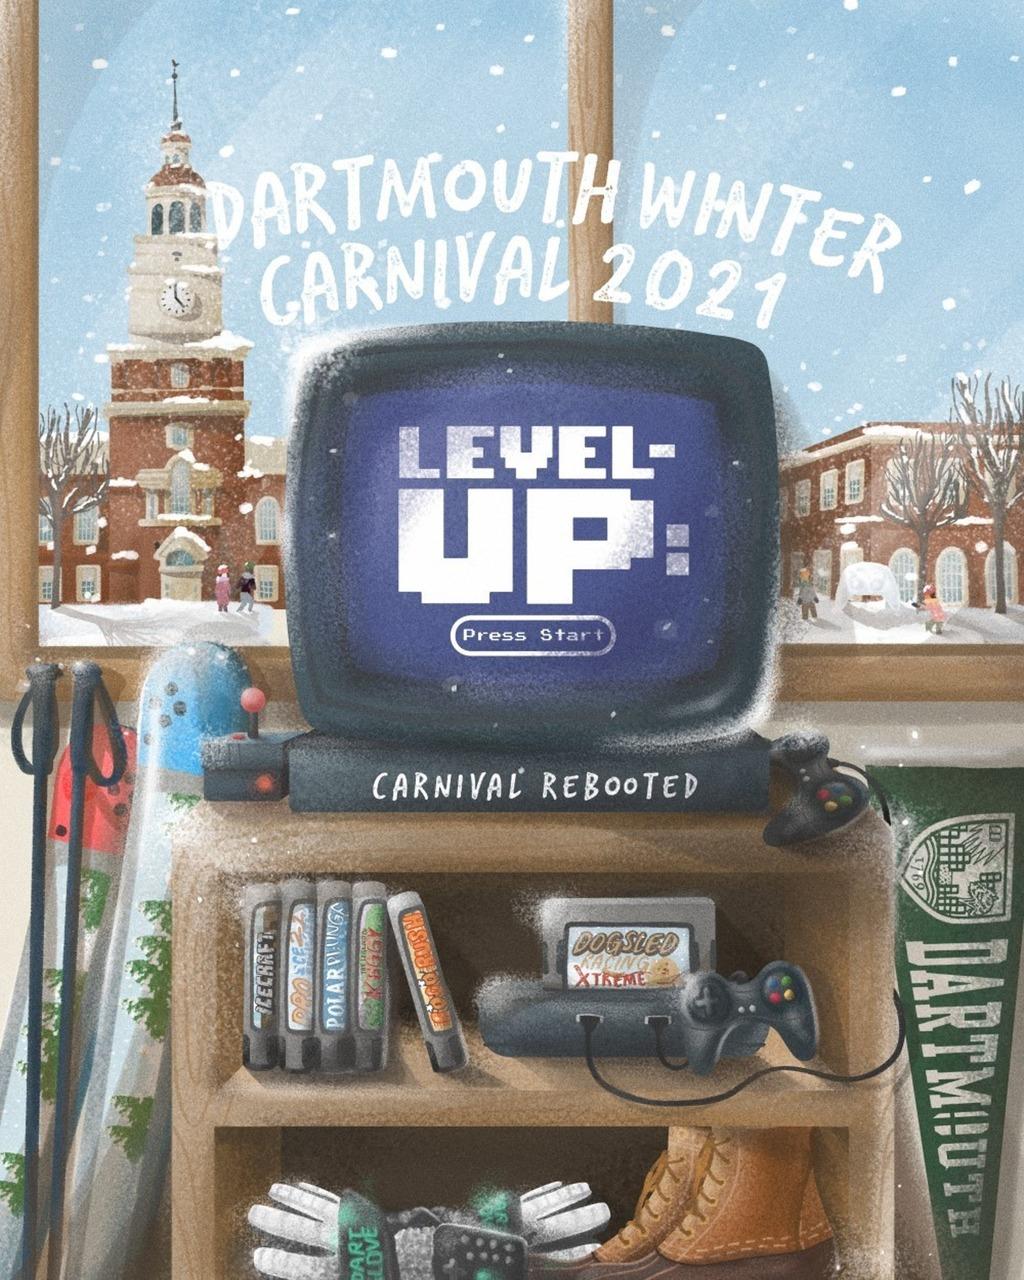 Dartmouth Winter Carnival Poster 2021 Collectible Ivy